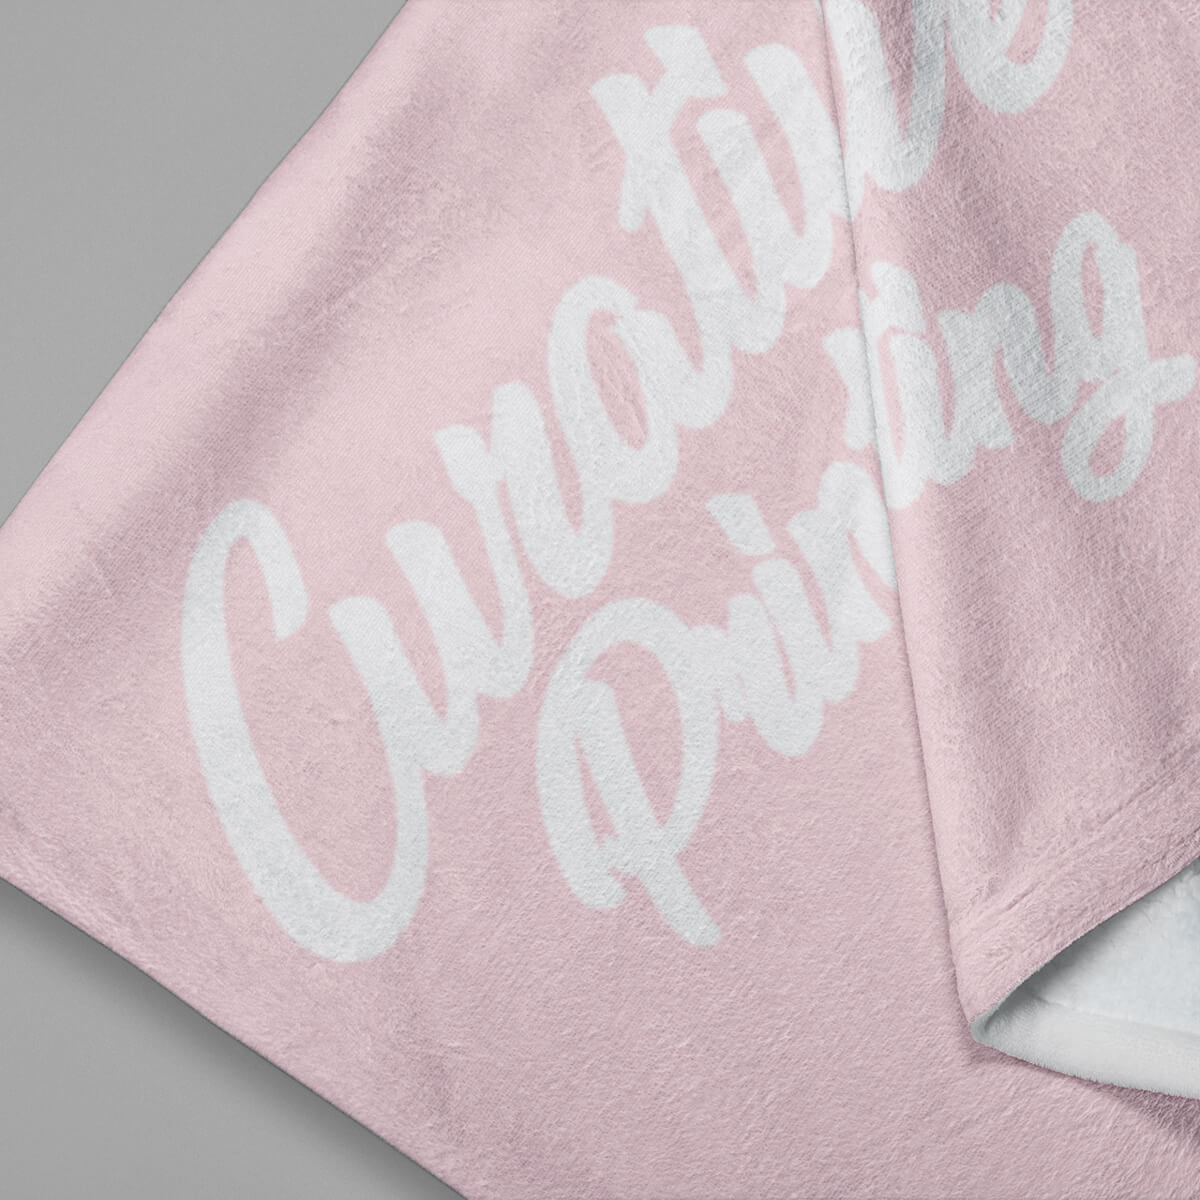 Soft pink with white imprint custom promotional fleece blankets by curative printing